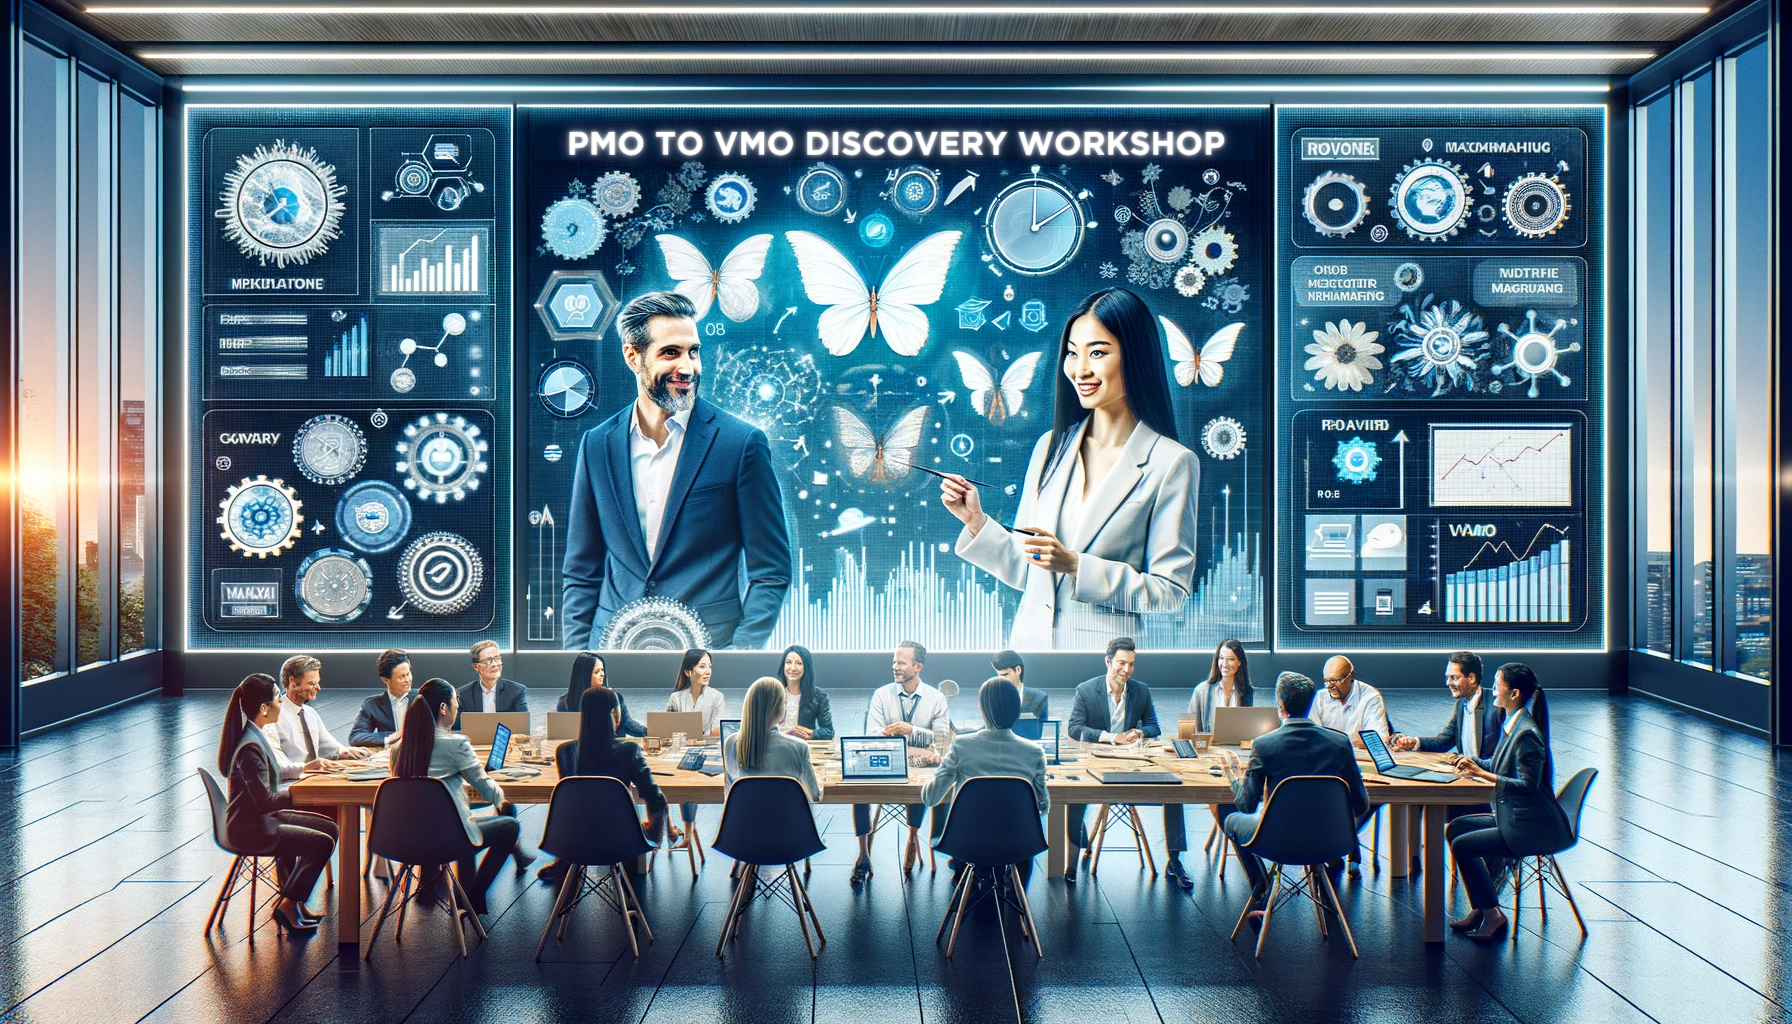 PMO to VMO Discovery Workshop